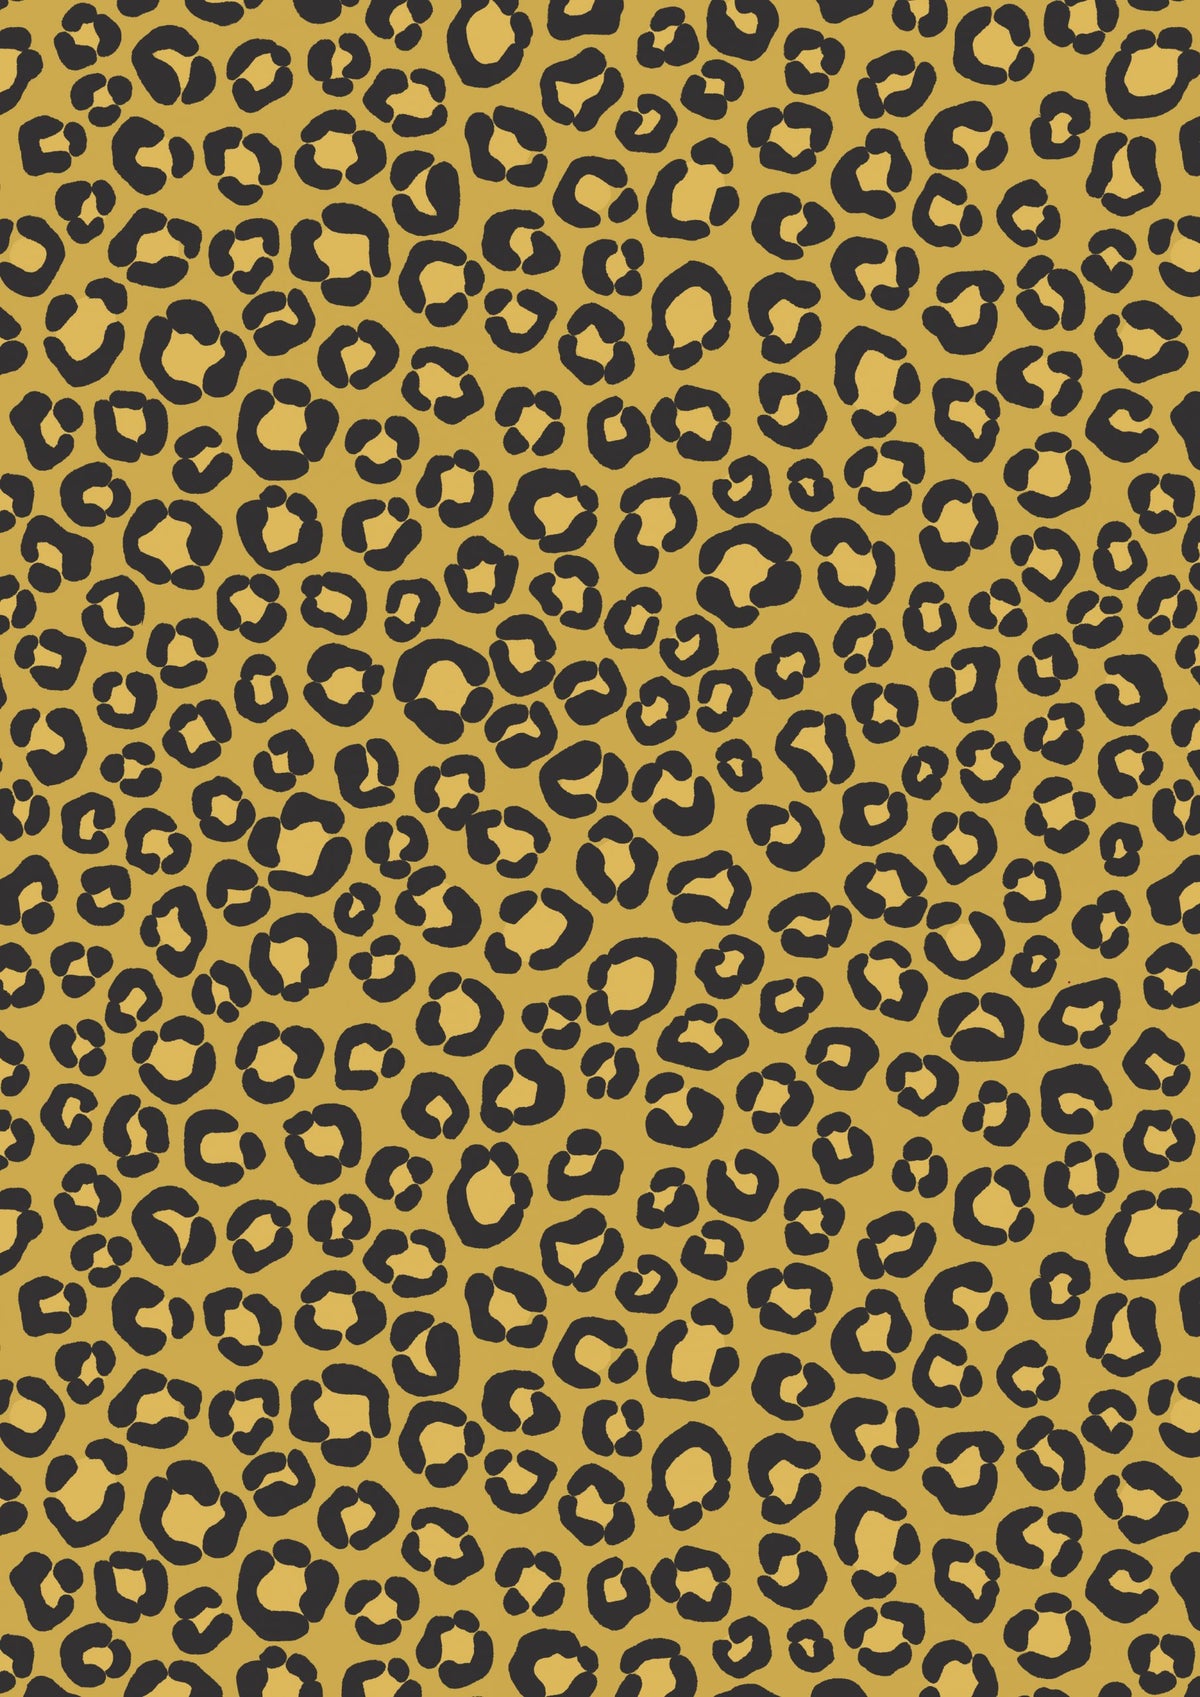 Small Things Wild Animals Quilt Fabric - Leopard Print in Gold/Black - A700